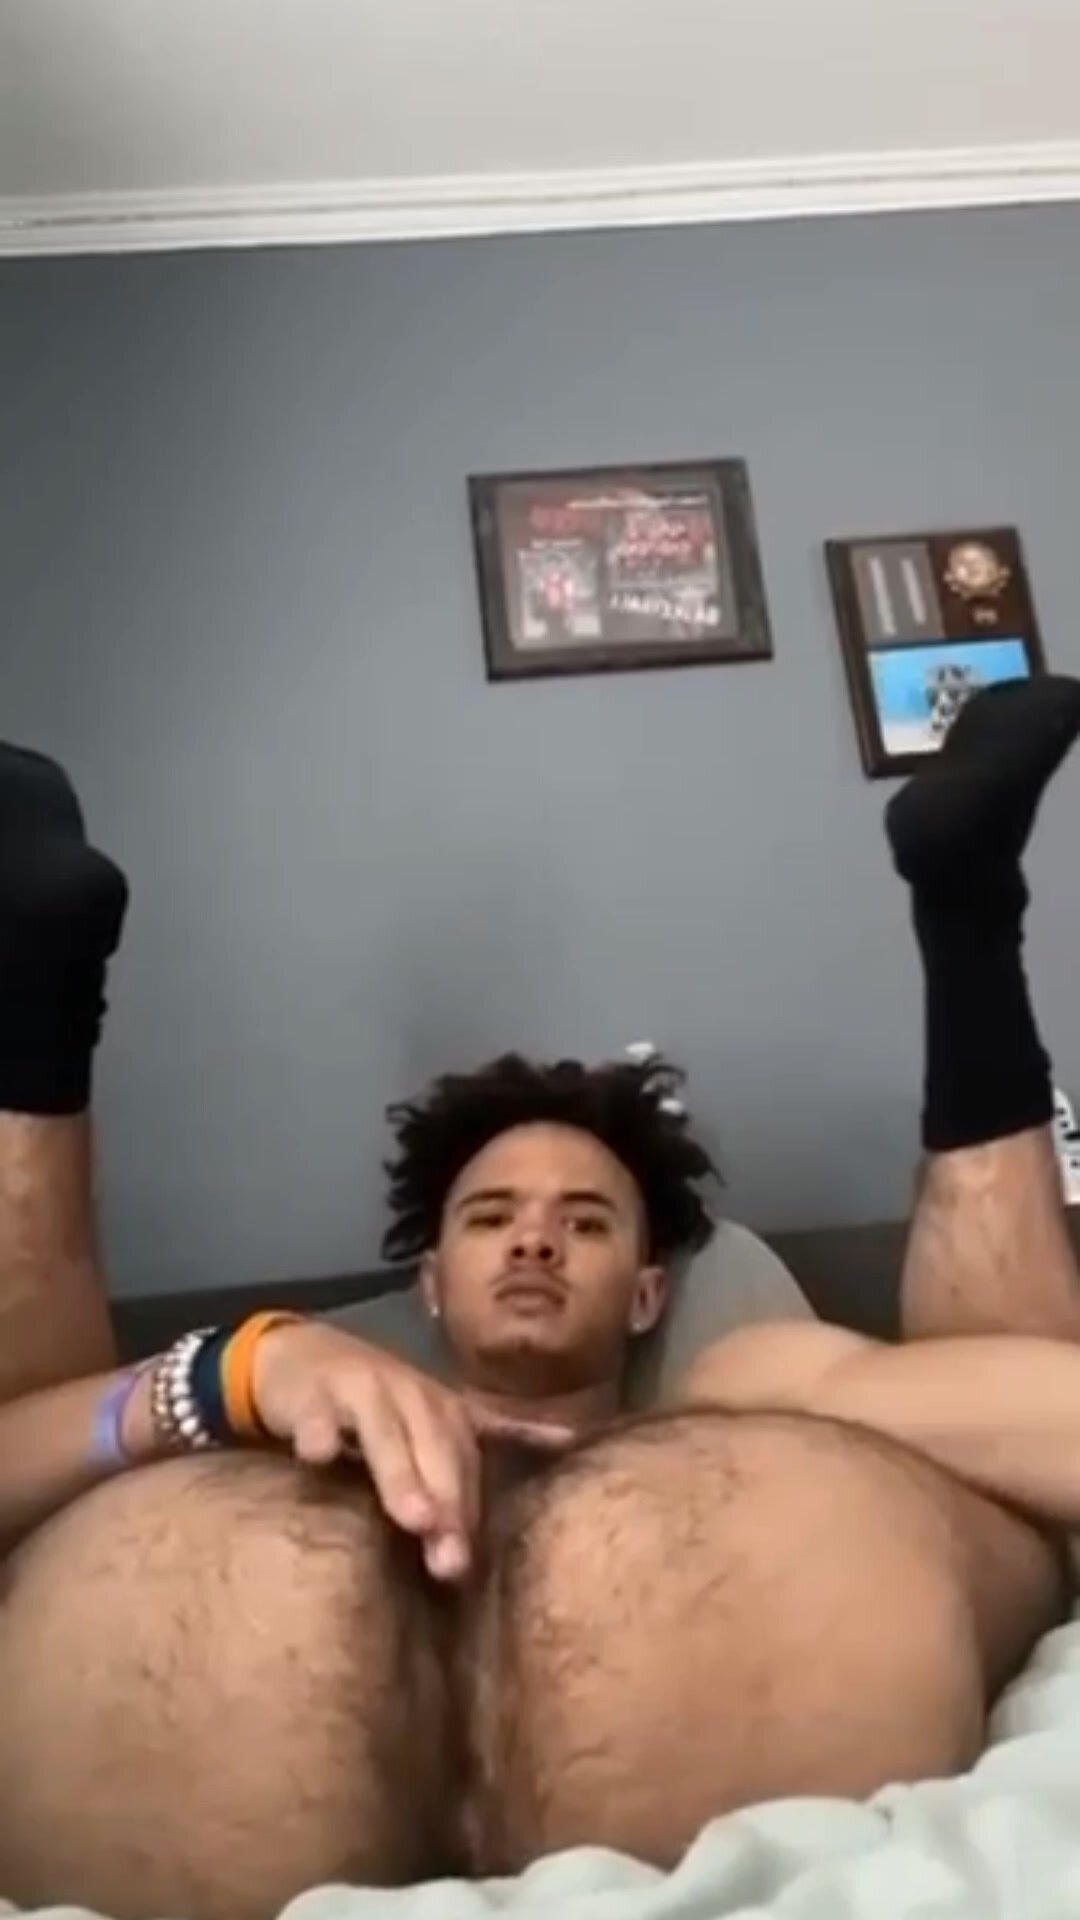 Lightskin guy showing his hairy butt